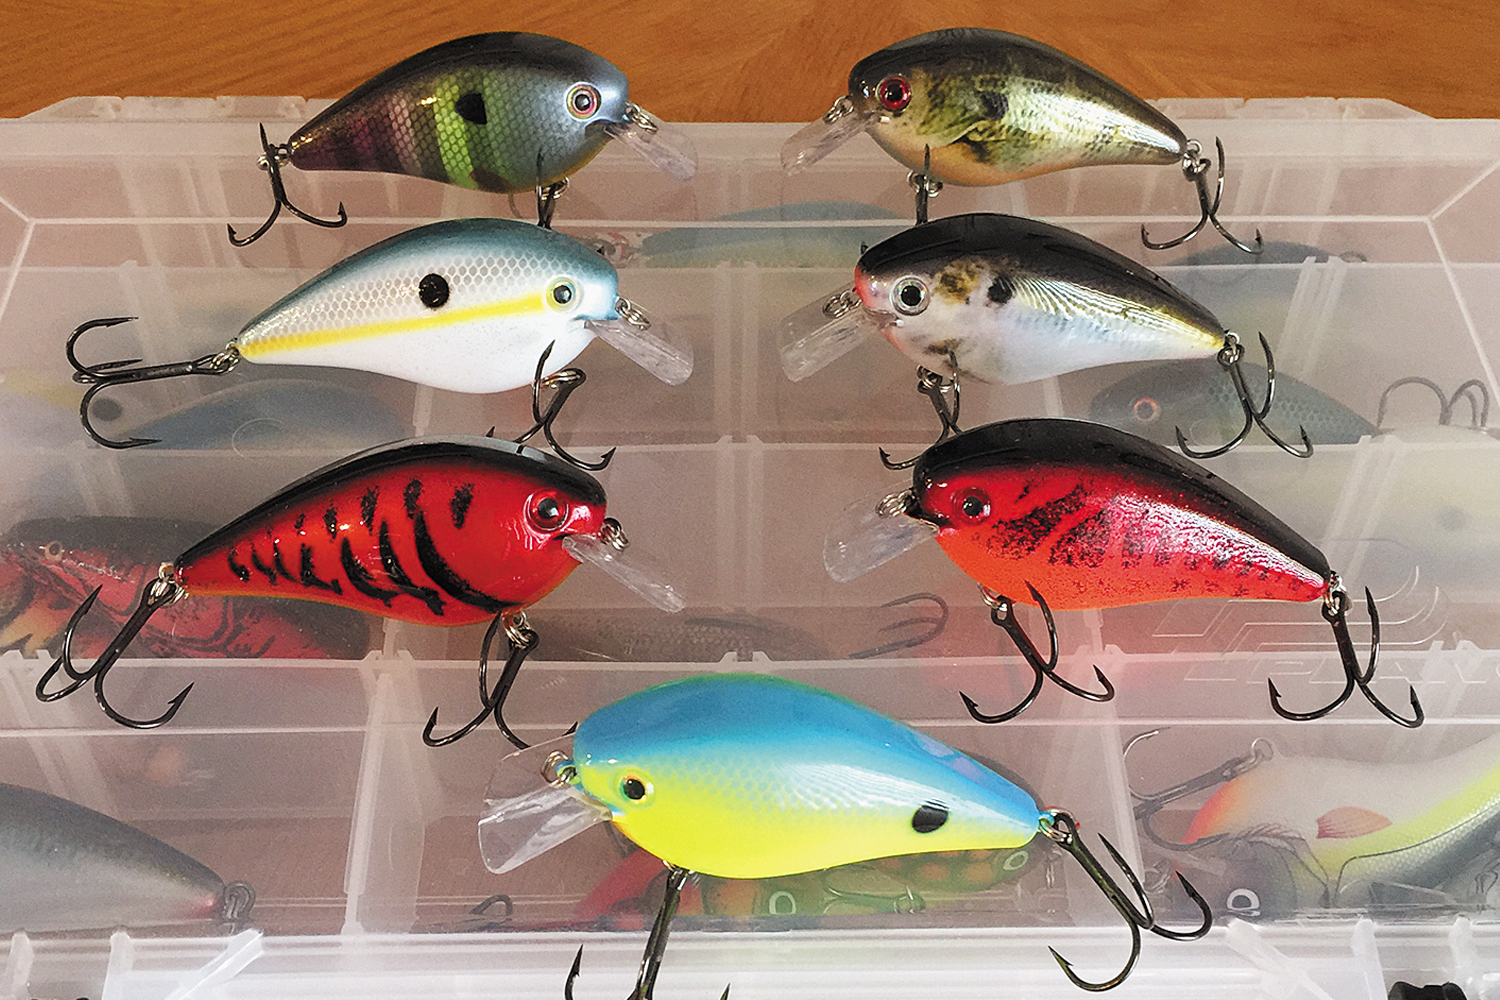 A foolproof fishing lure